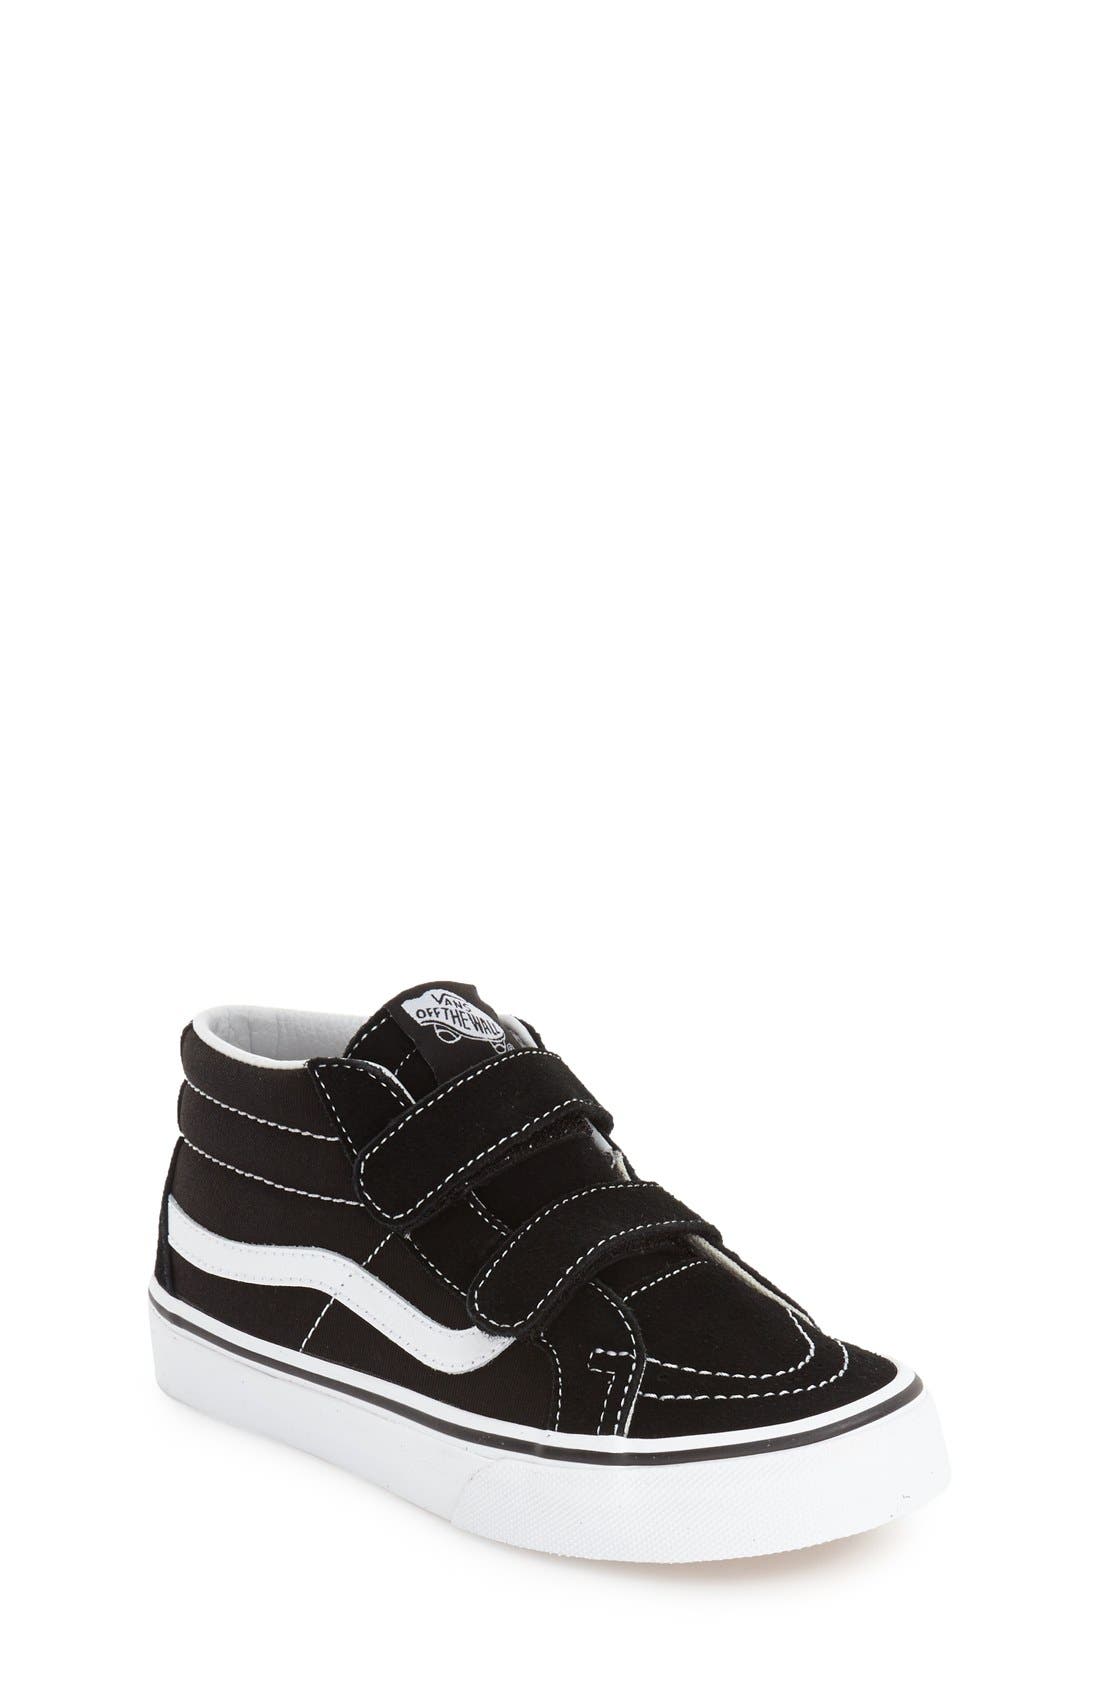 van shoes for boys